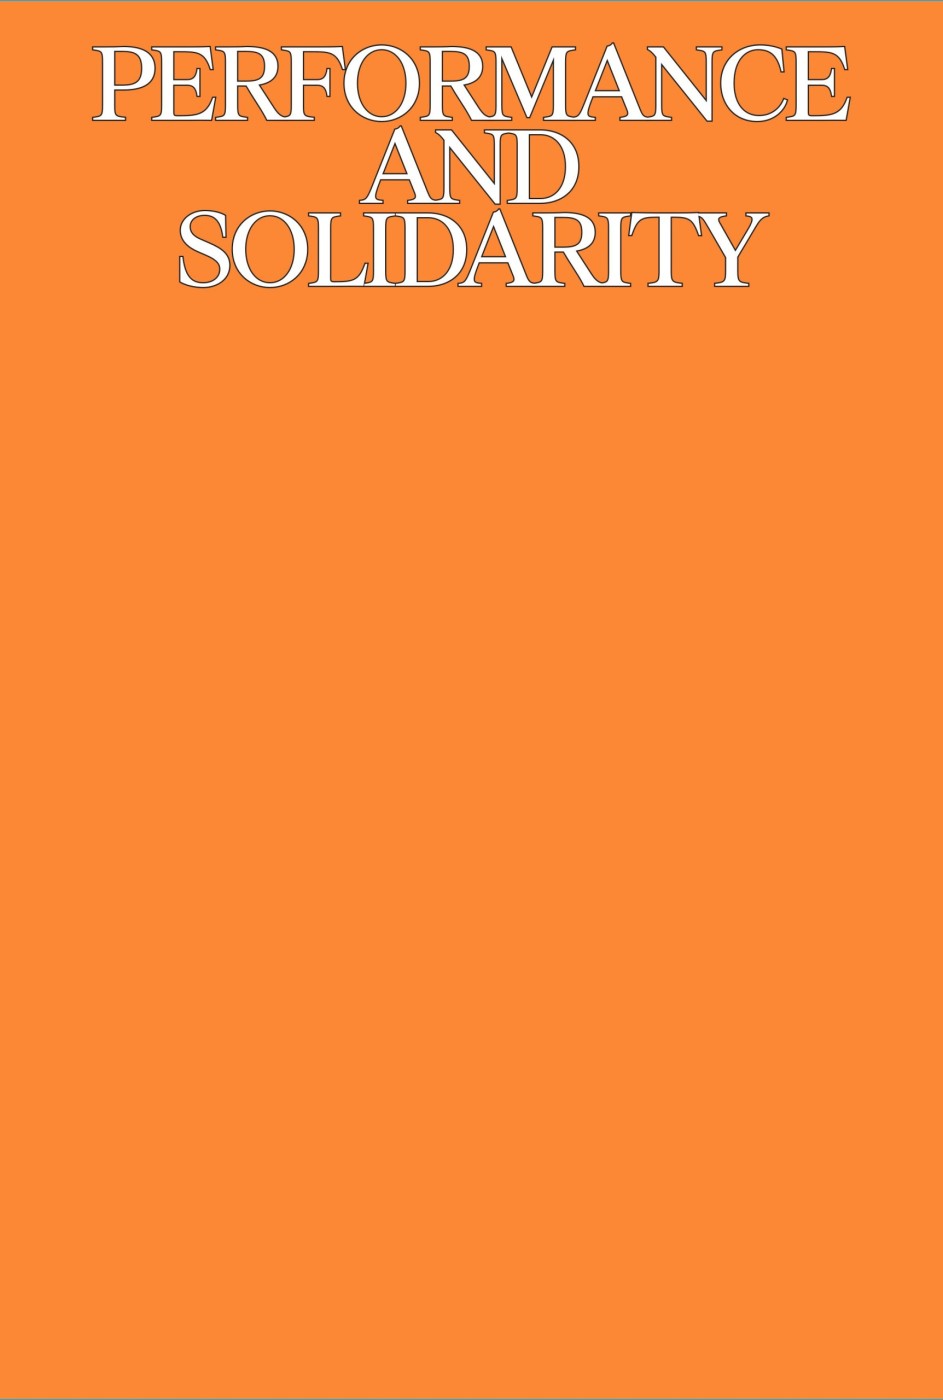 Orange cover of the Performance and Solidarity publication